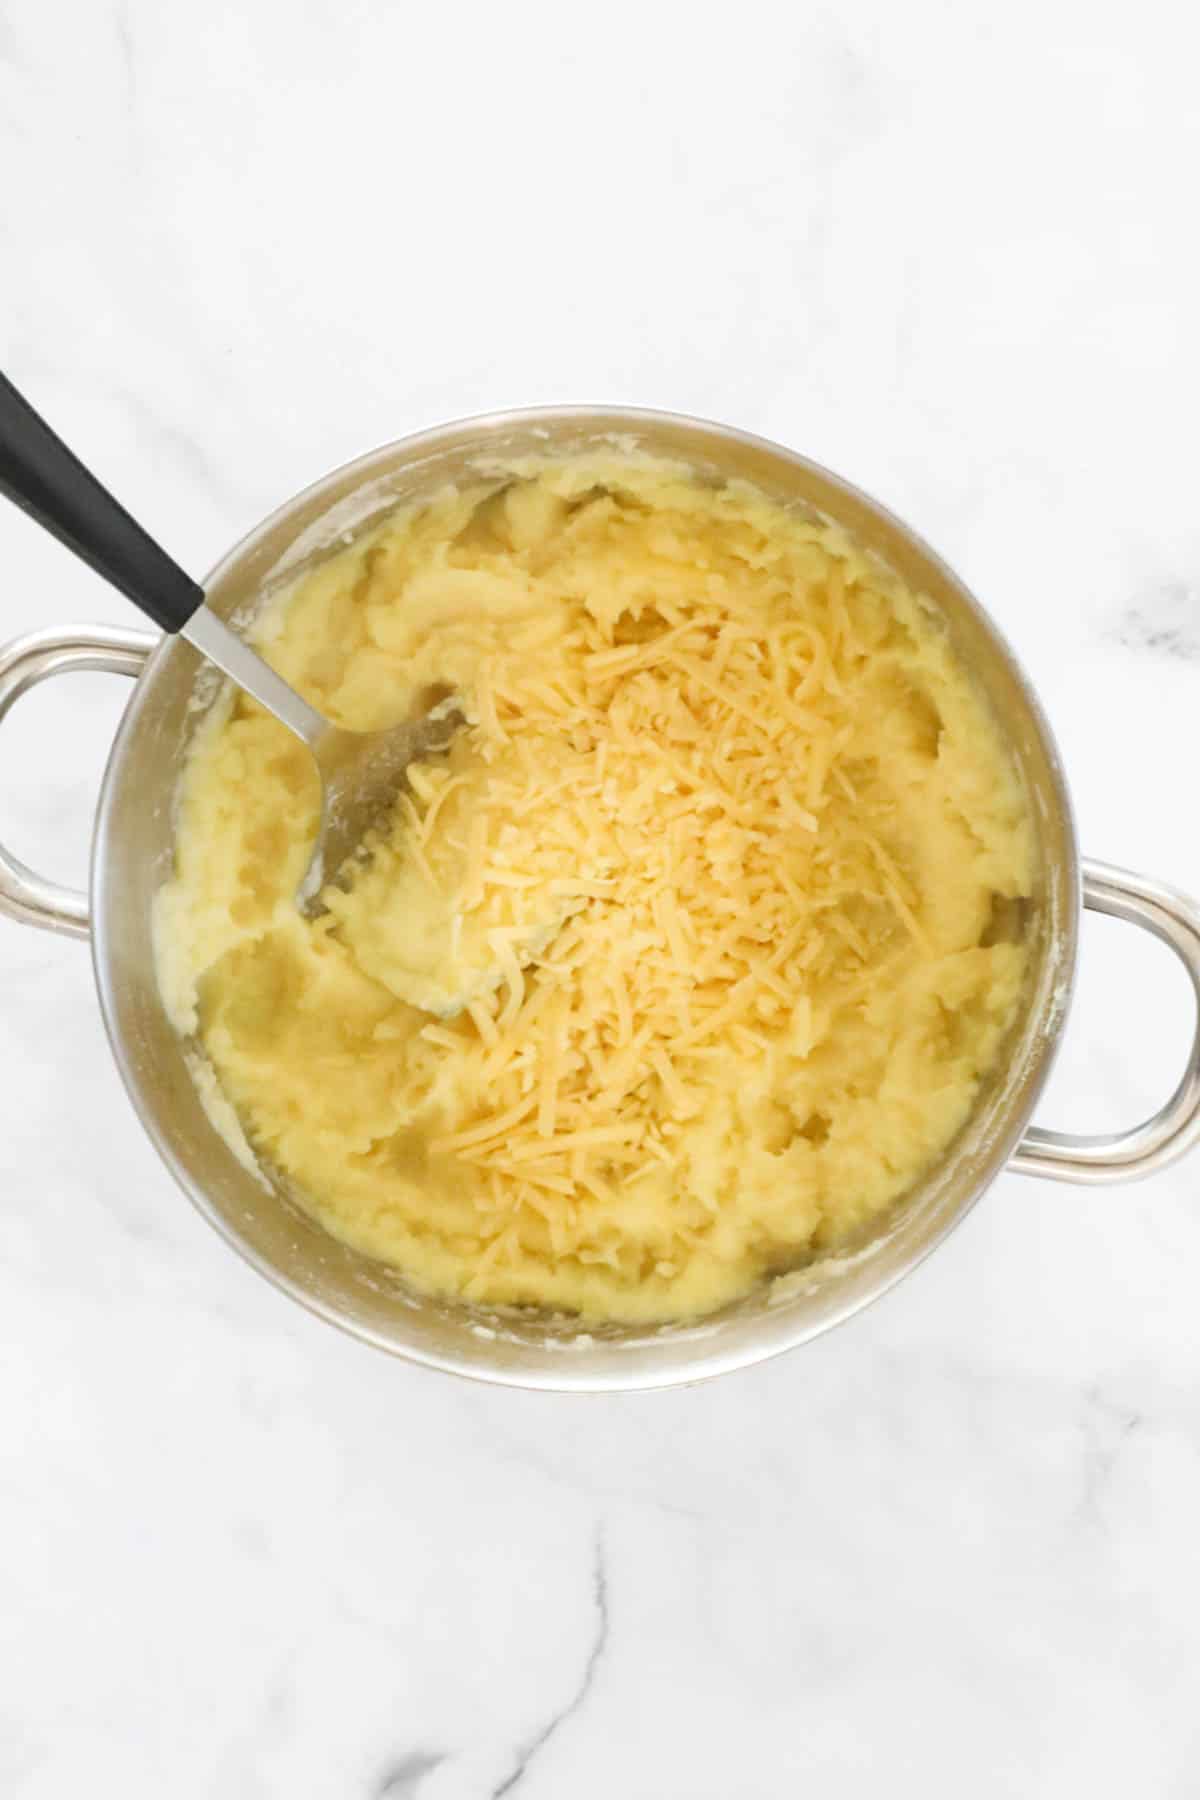 Grated cheese added to mashed potato.